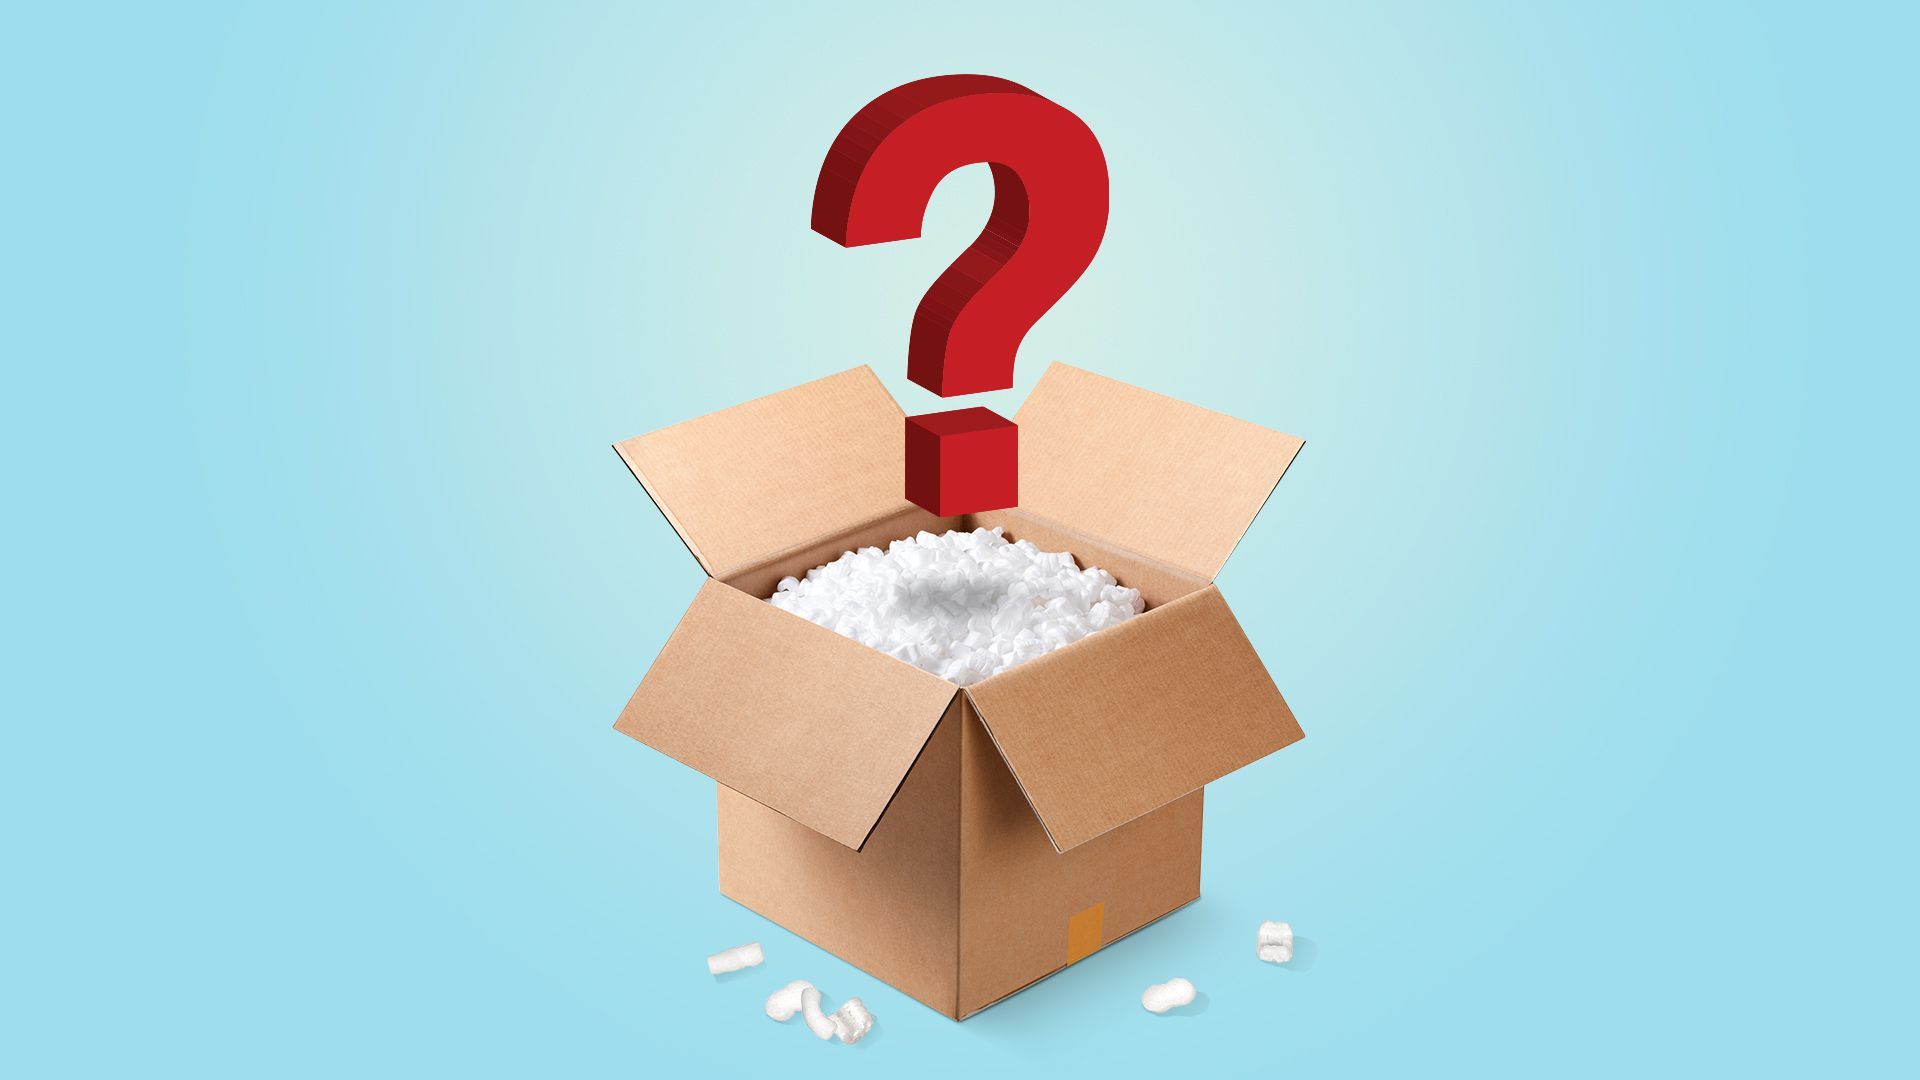 Illustration of a question mark coming out of a shipping box.